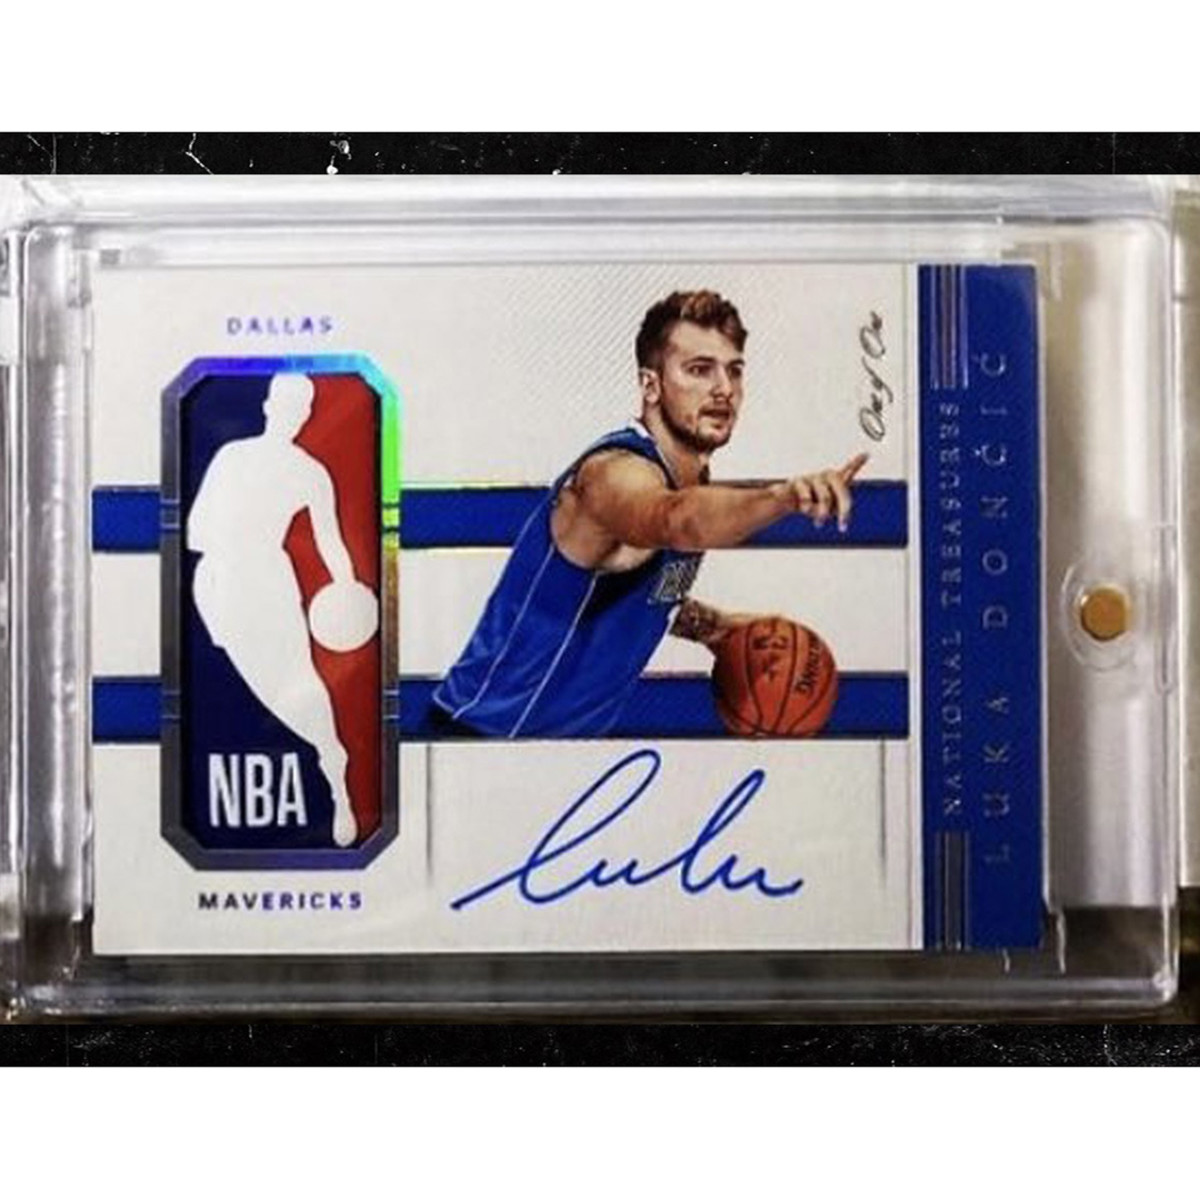 Luka Doncic rookie card that sold for $4.6 million.